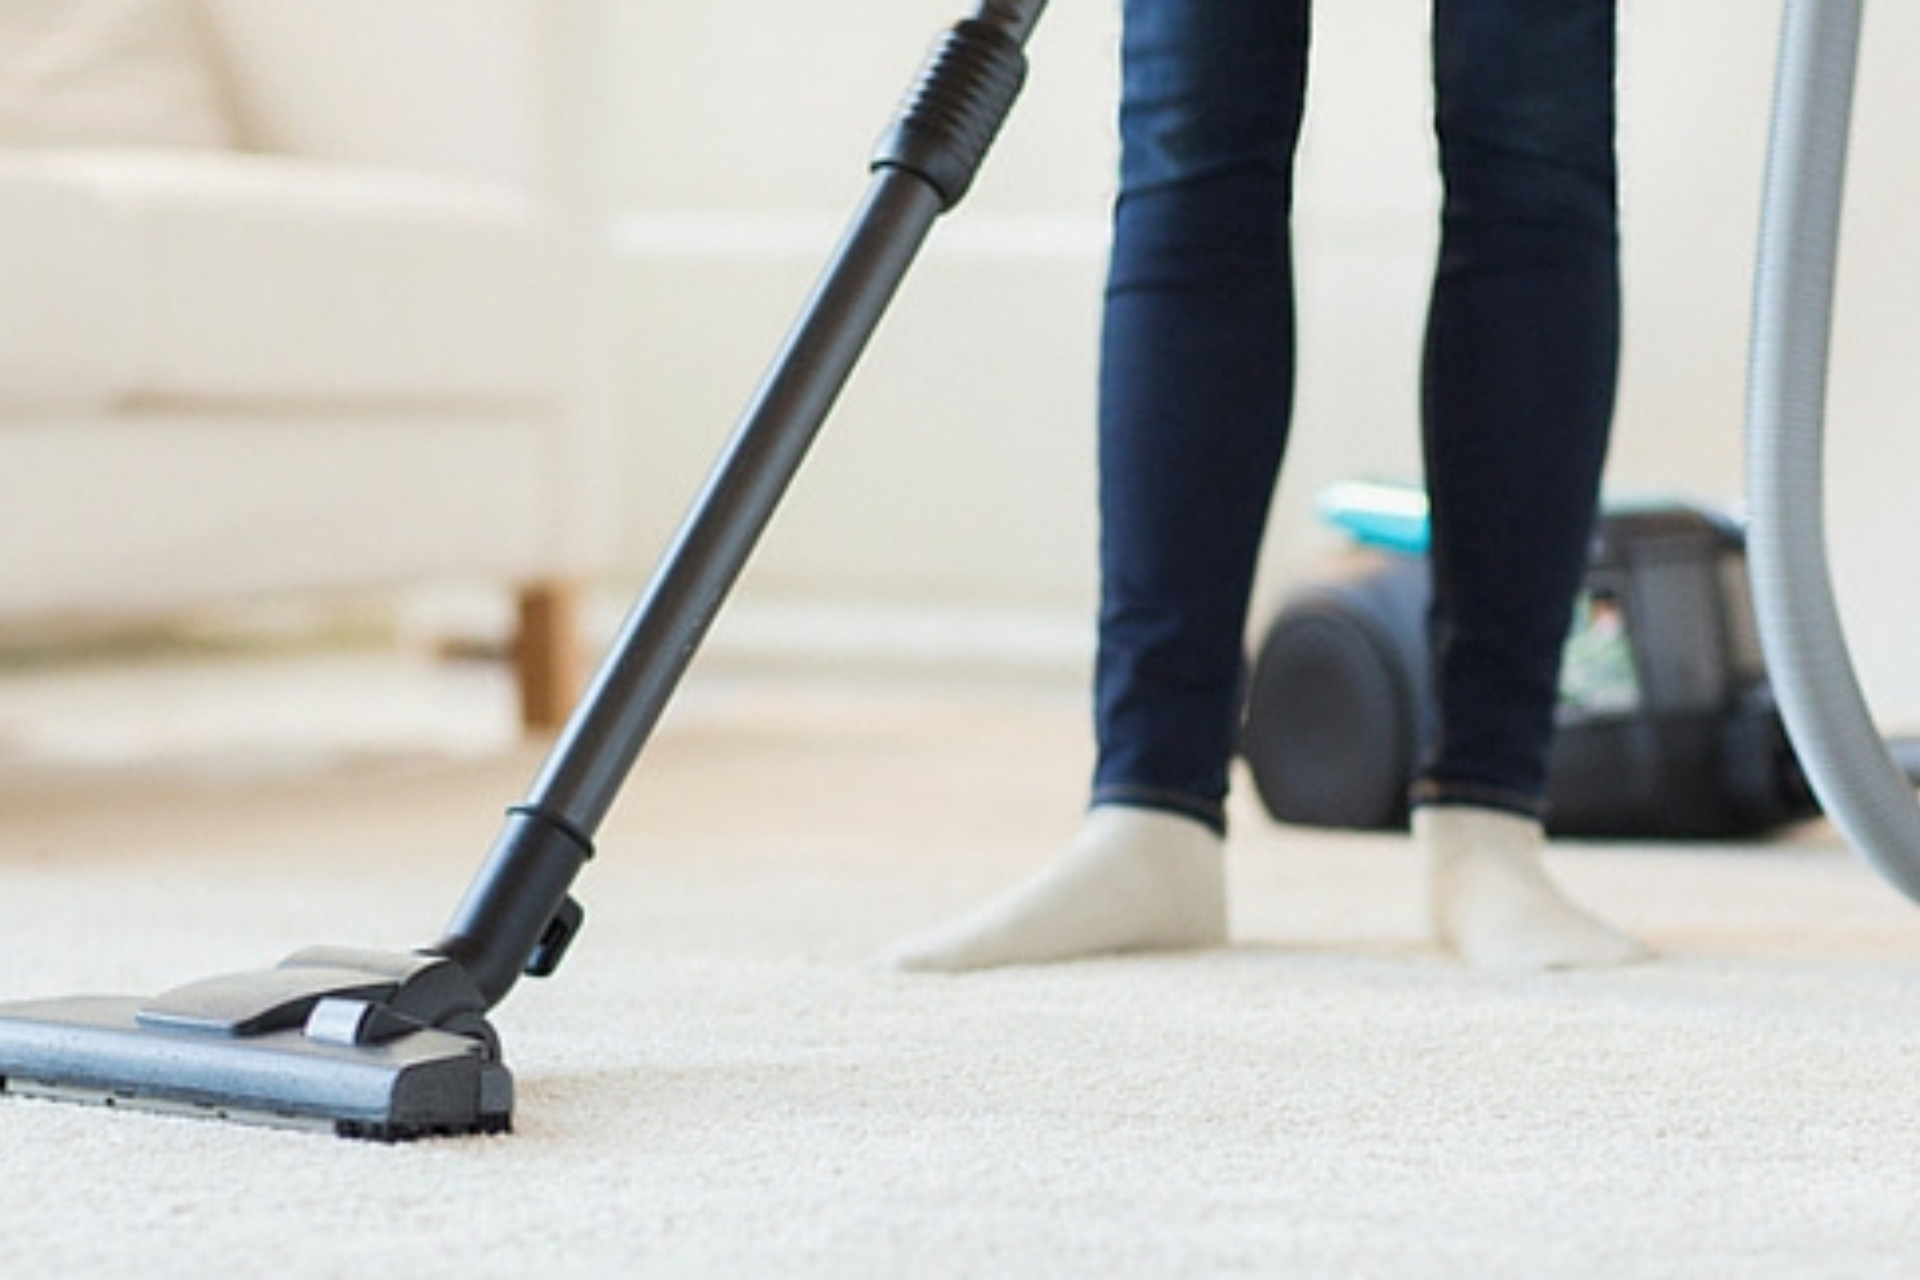 5 Carpet Care Tips to Keep Your Carpet Looking Its Best...